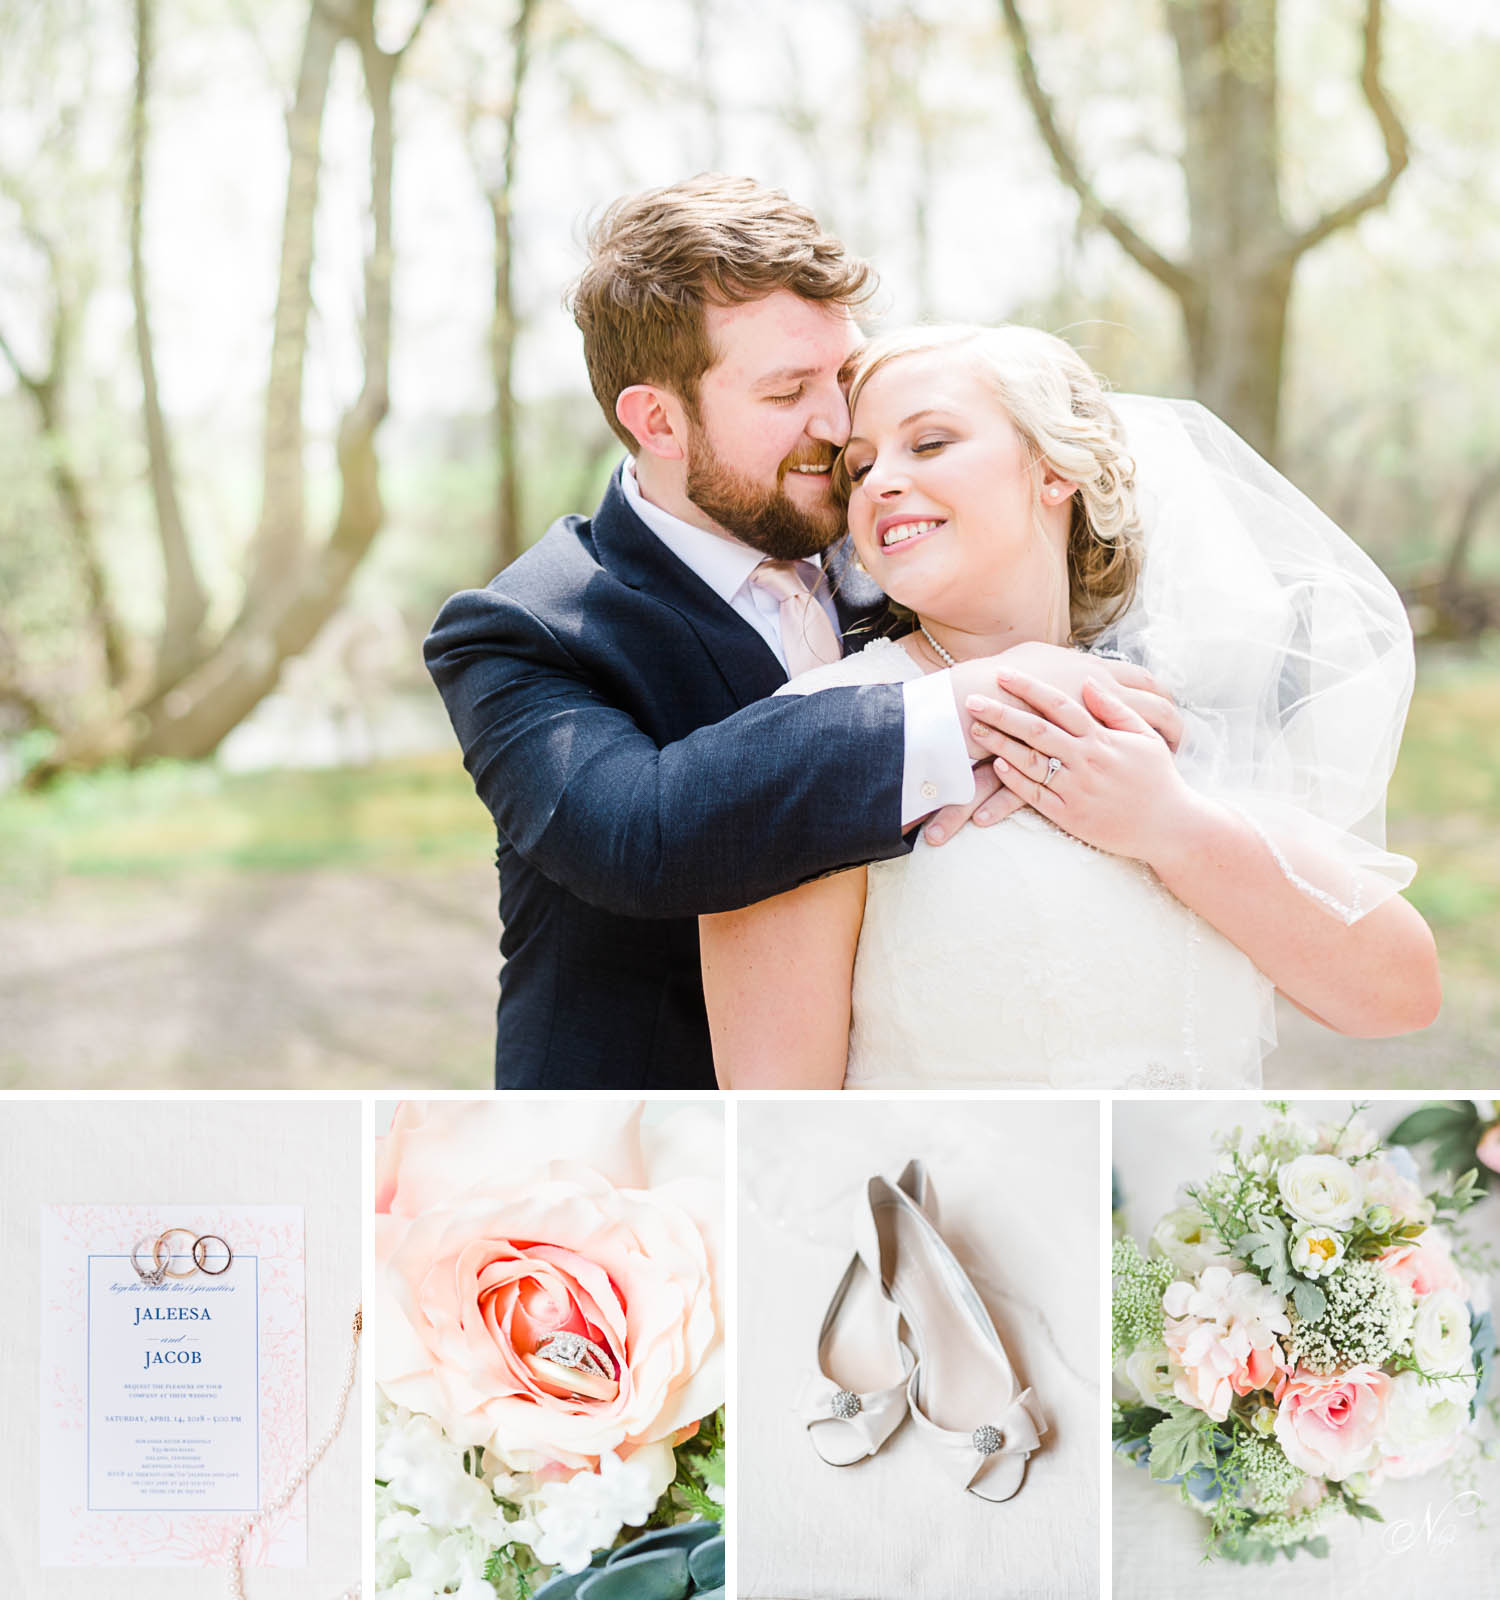 bride and groom at the Hiwassee river in early spring.Wedding invitataion with wedding rings sitting on it. bouqueat of pink and white flowers. white mini heeled white wedding flats.